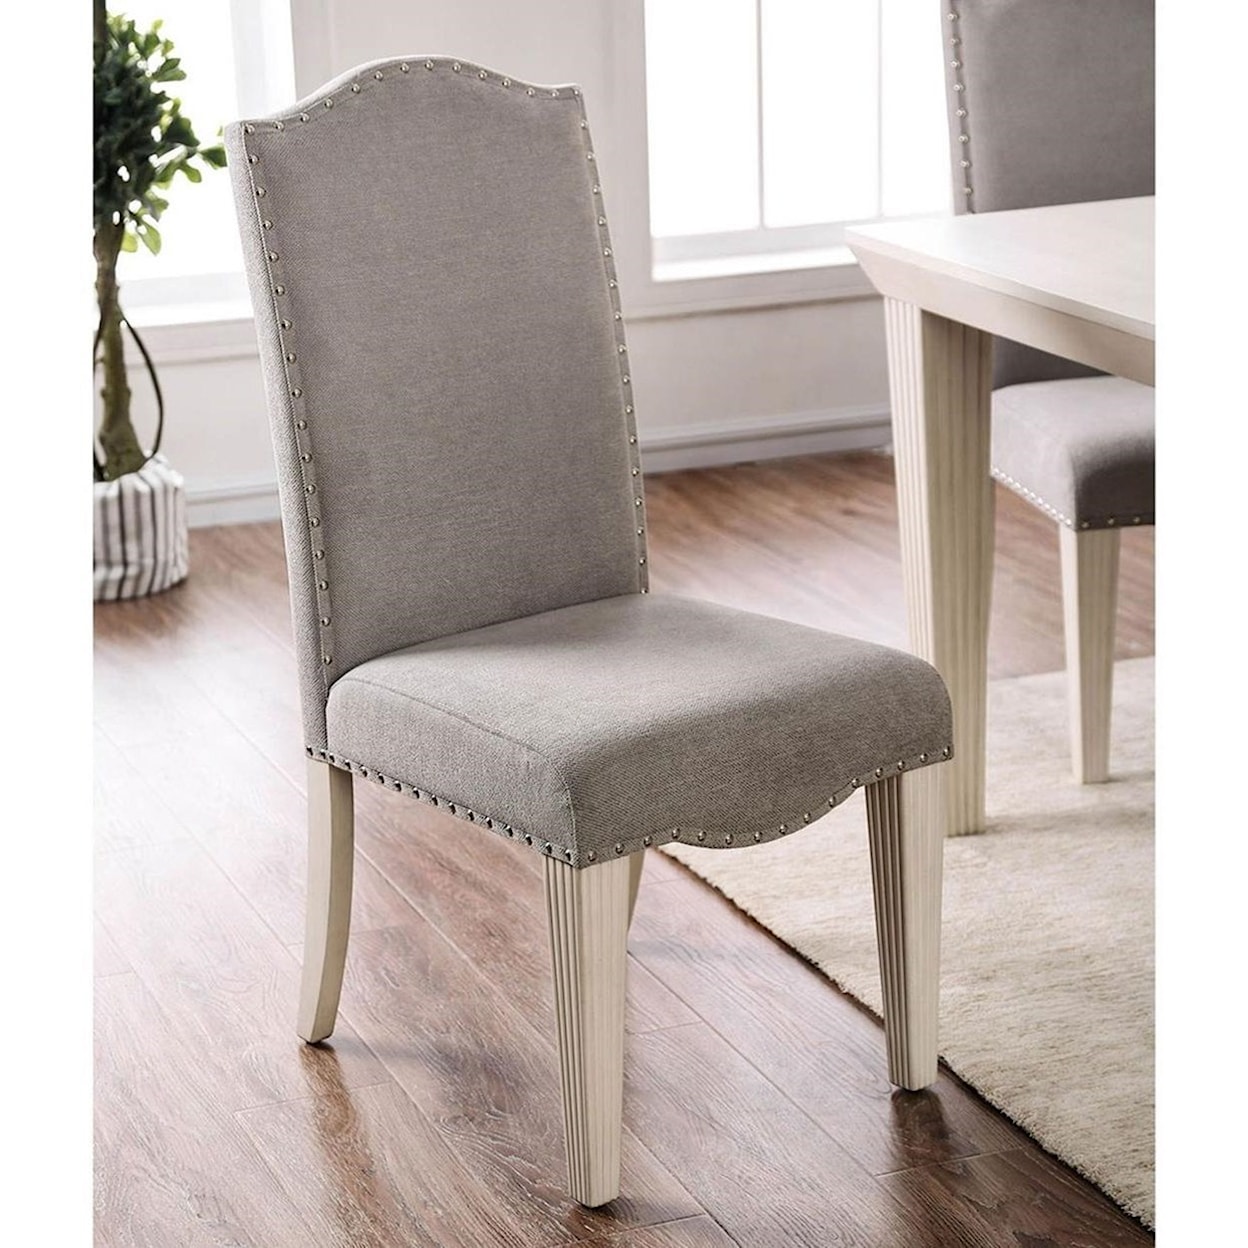 FUSA Daniella Set of 2 Upholstered Side Chairs